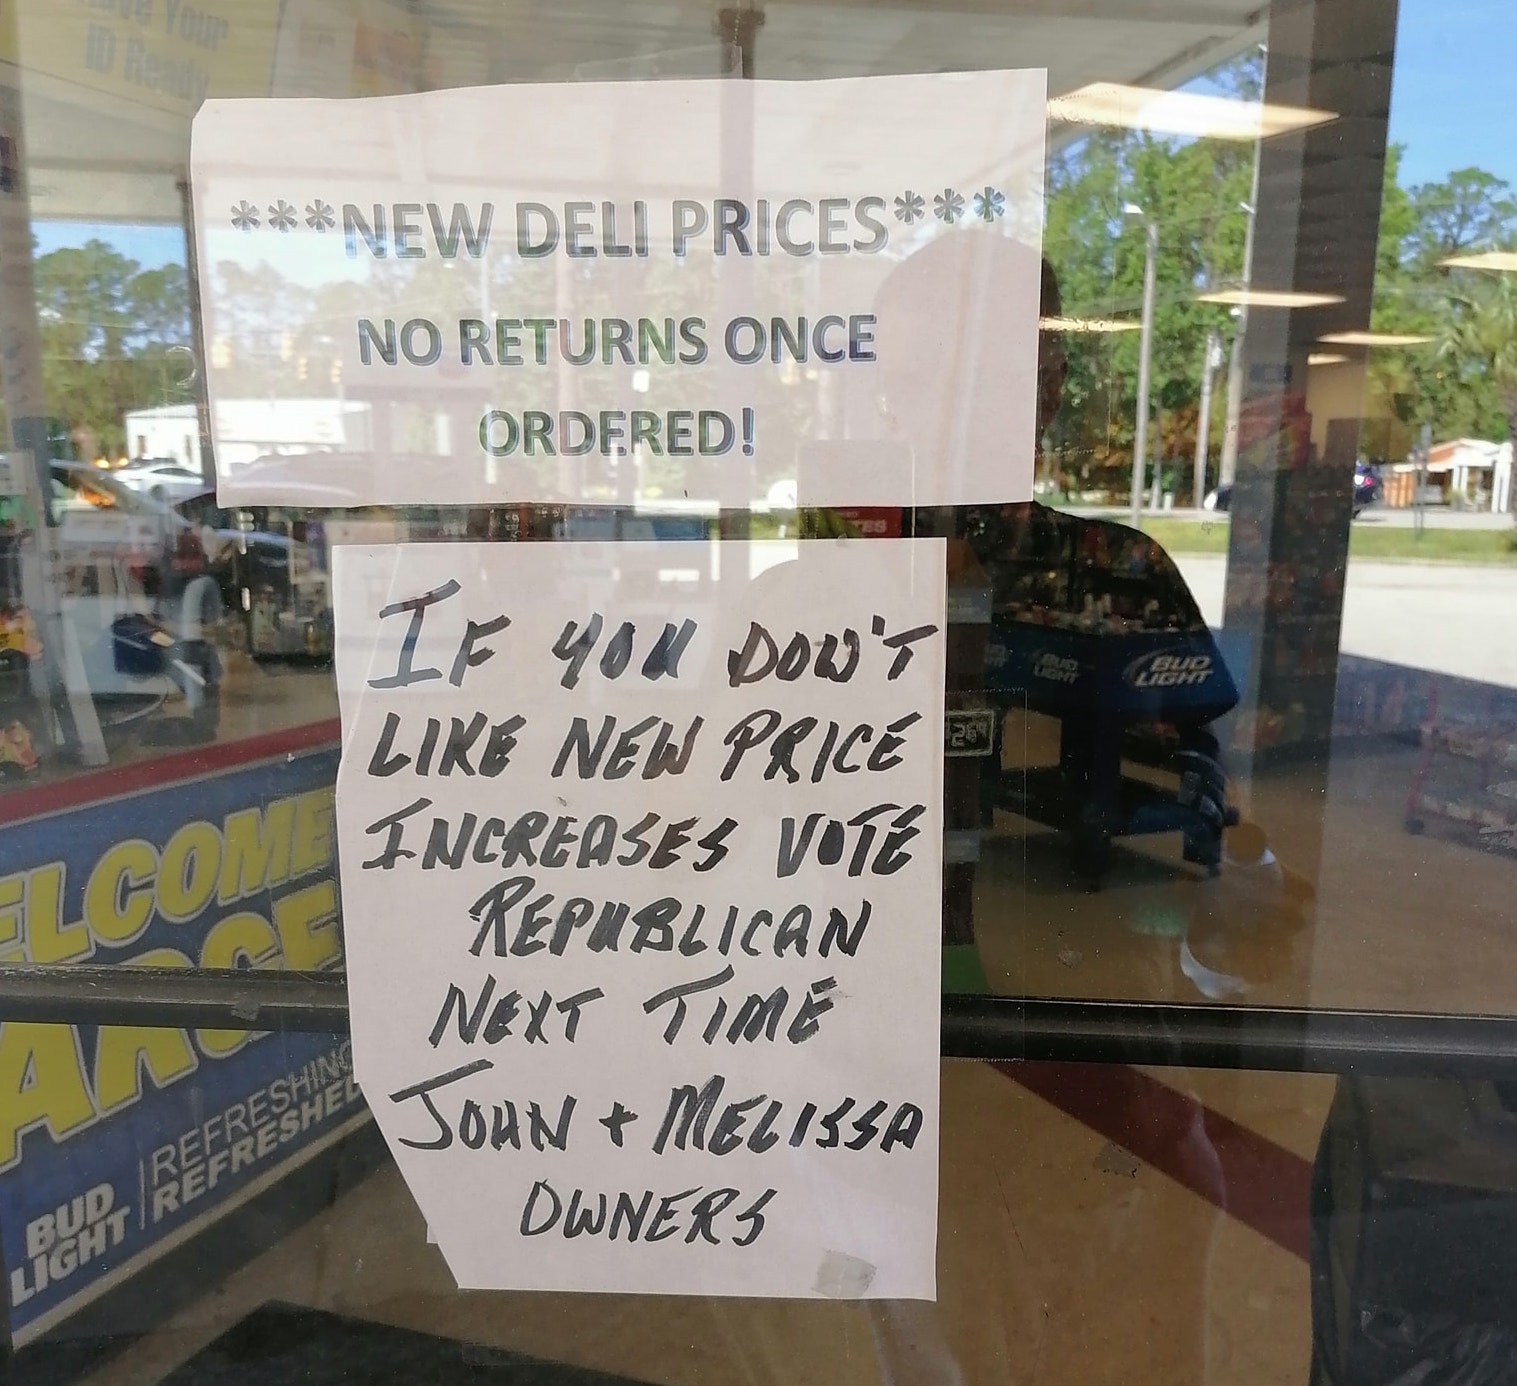 Horrible Management - car - Dute New Deli Prices A. No Returns Once Ordered! Tomt If You Don'T New Price Bud Light Lco Increases Vote Republican Next Time Joan Melissa Dwners Bud Refreshin LightRefresher